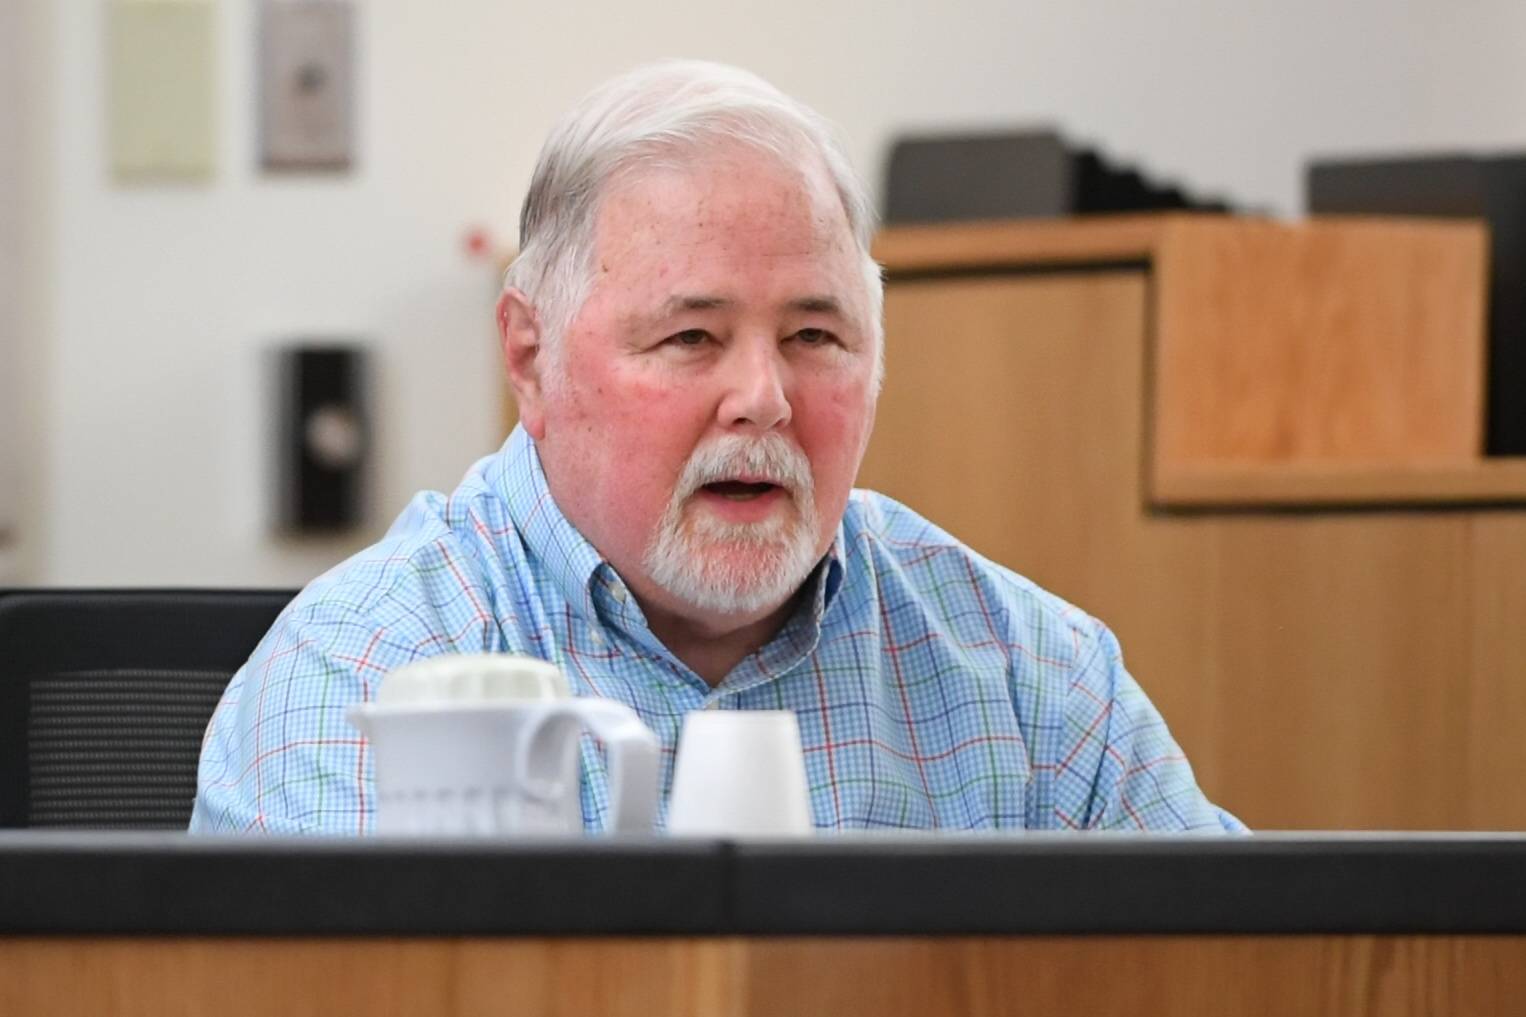 John Kelly Tonsmeire answers questions from the witness stand in Juneau Superior Court on Wednesday, Sept. 4, 2019, during the trial of Laron Carlton Graham on two counts of first-degree murder for the November 2015 shooting deaths of 36-year-old Robert H. Meireis and 34-year-old Elizabeth K. Tonsmeire. John Kelly Tonsmeire was the first to discover the murder scene when he went to check up on his daughter. (Michael Penn | Juneau Empire)